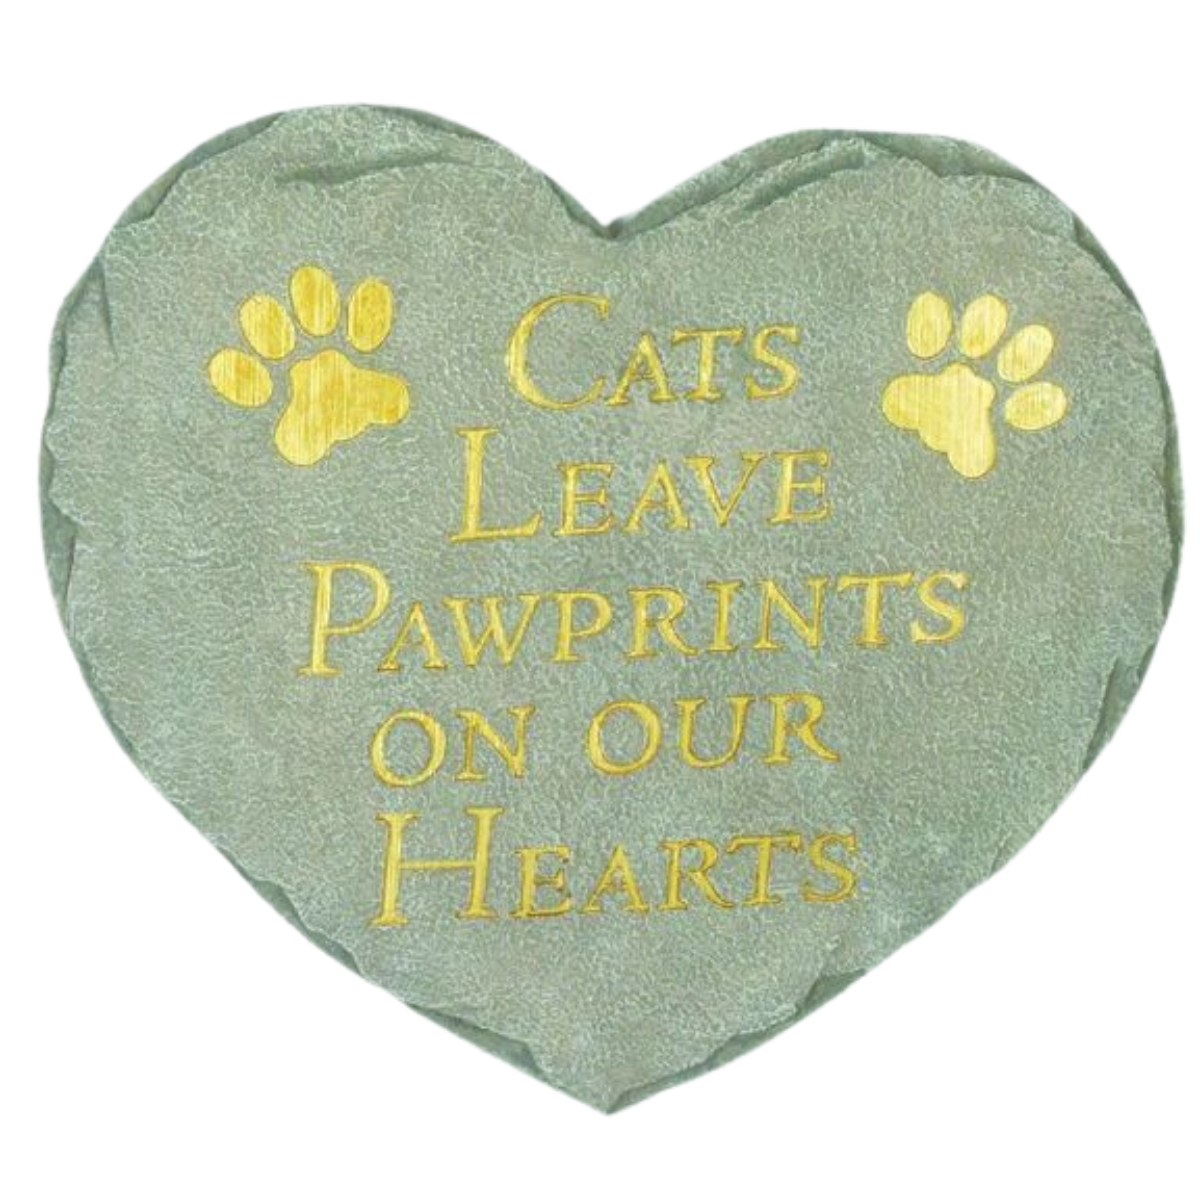 pet memorial garden stone for the family cat, cats leave pawprints on our hearts cat stepping stone